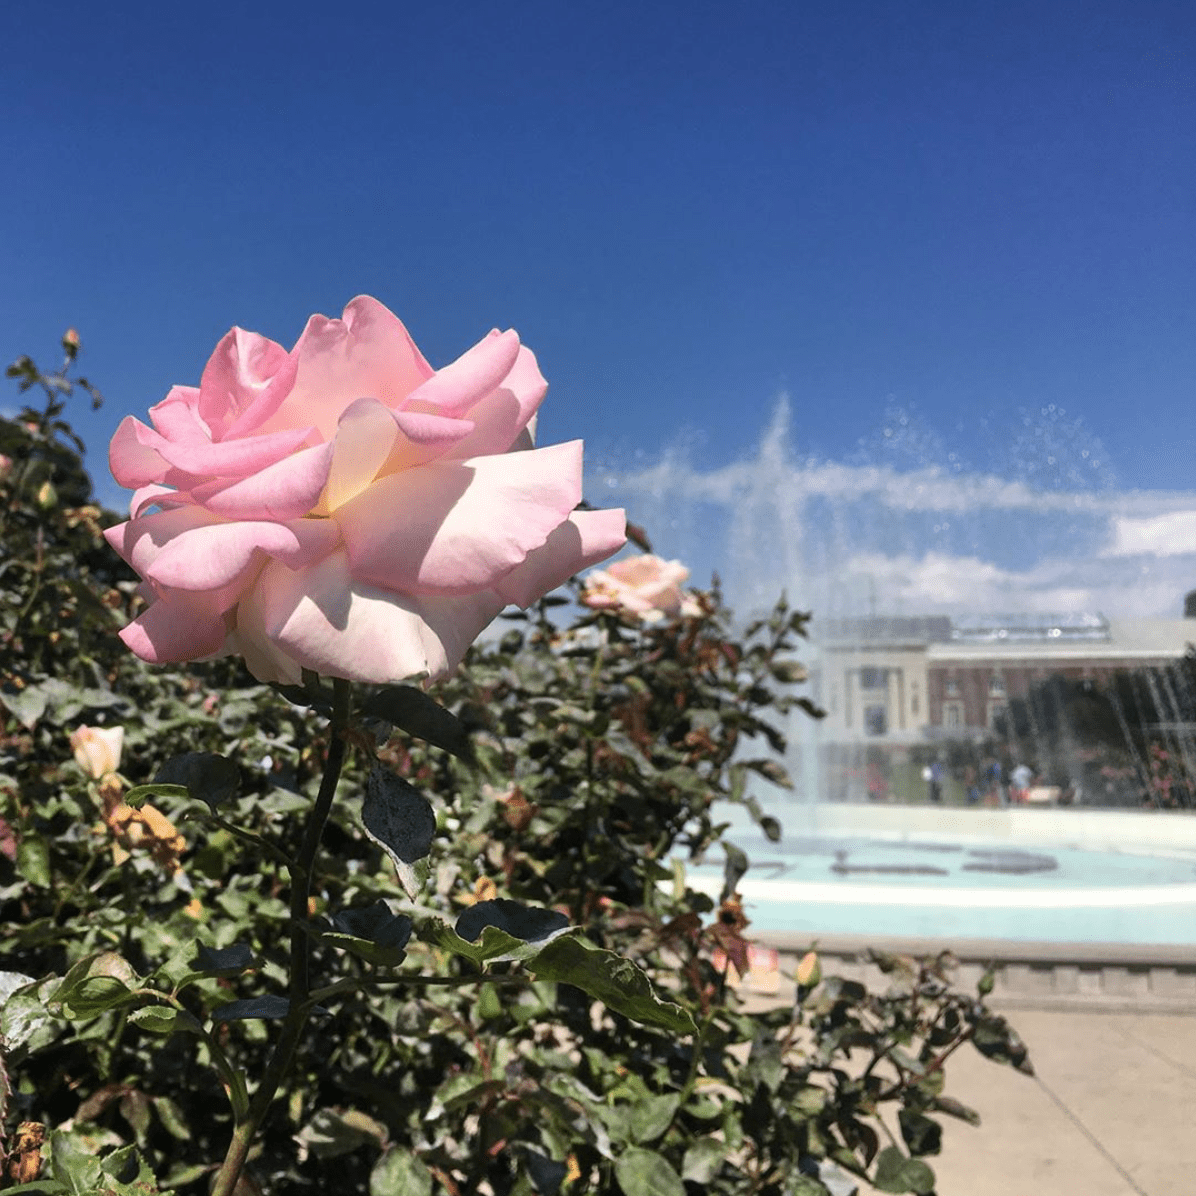 Things to Do In LA: Exposition Park Rose Garden